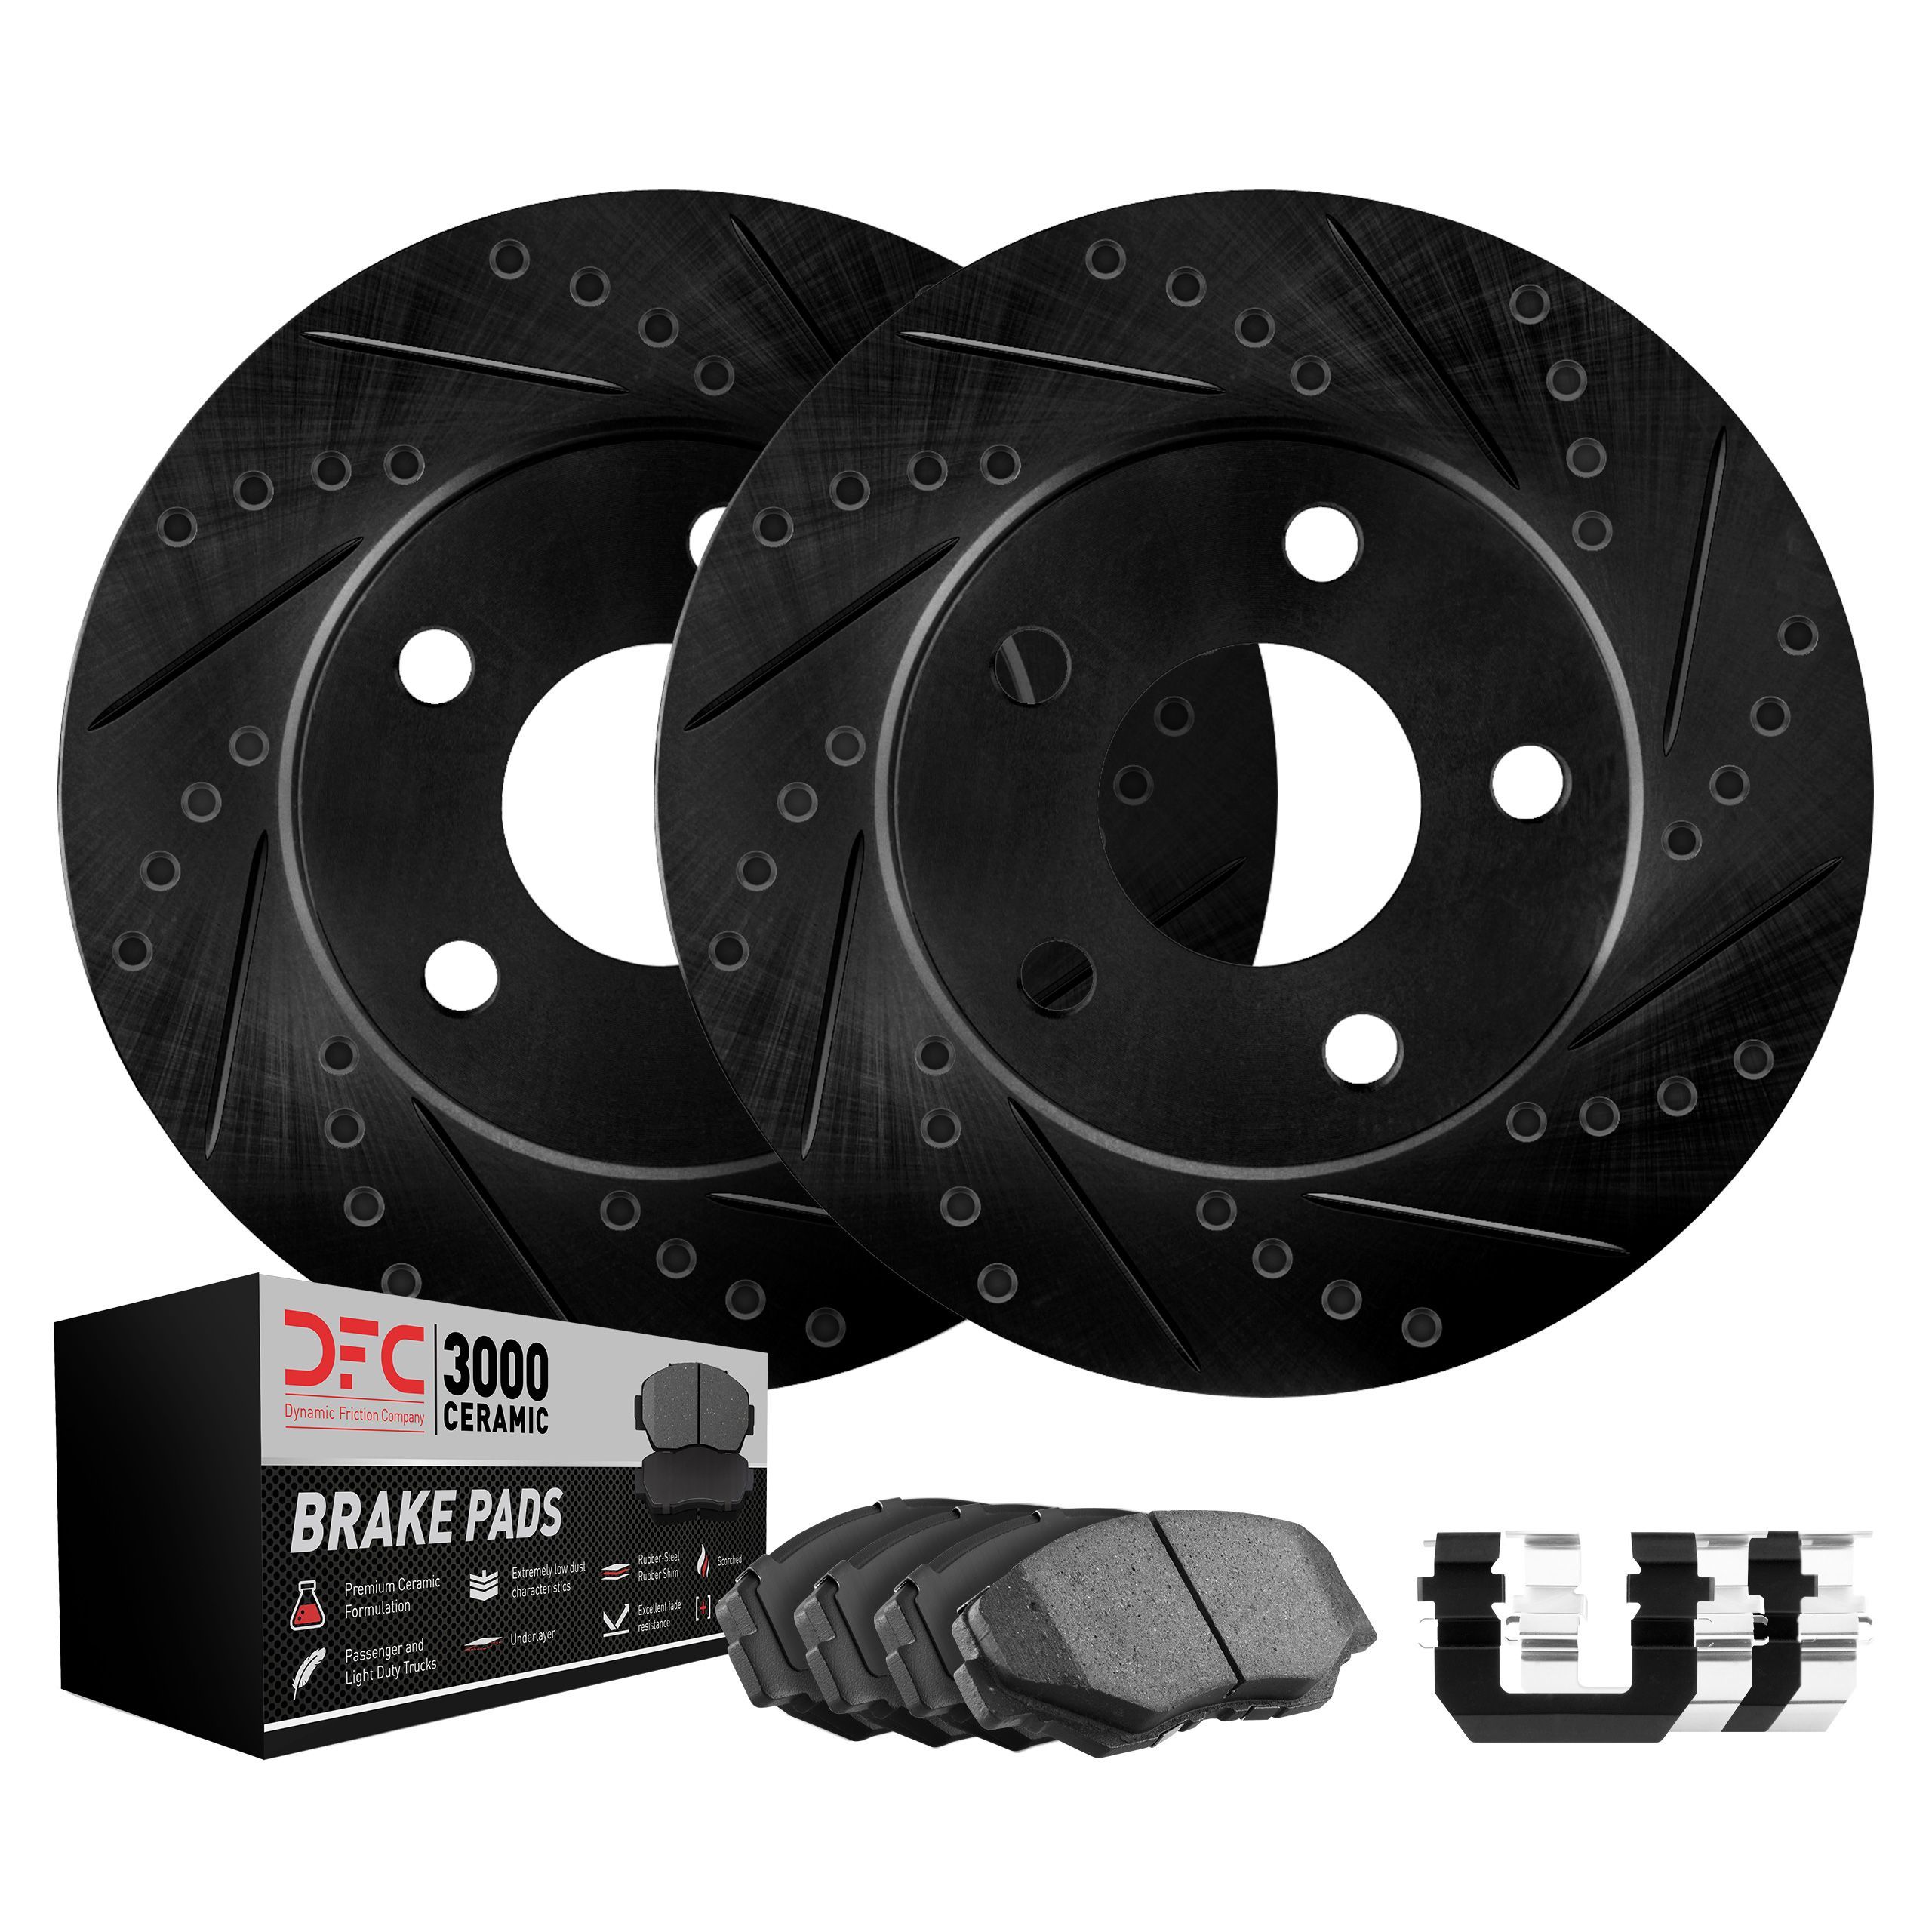 Front Hart Brakes Ceramic Series Brake Pad With Rubber Steel Rubber Shims